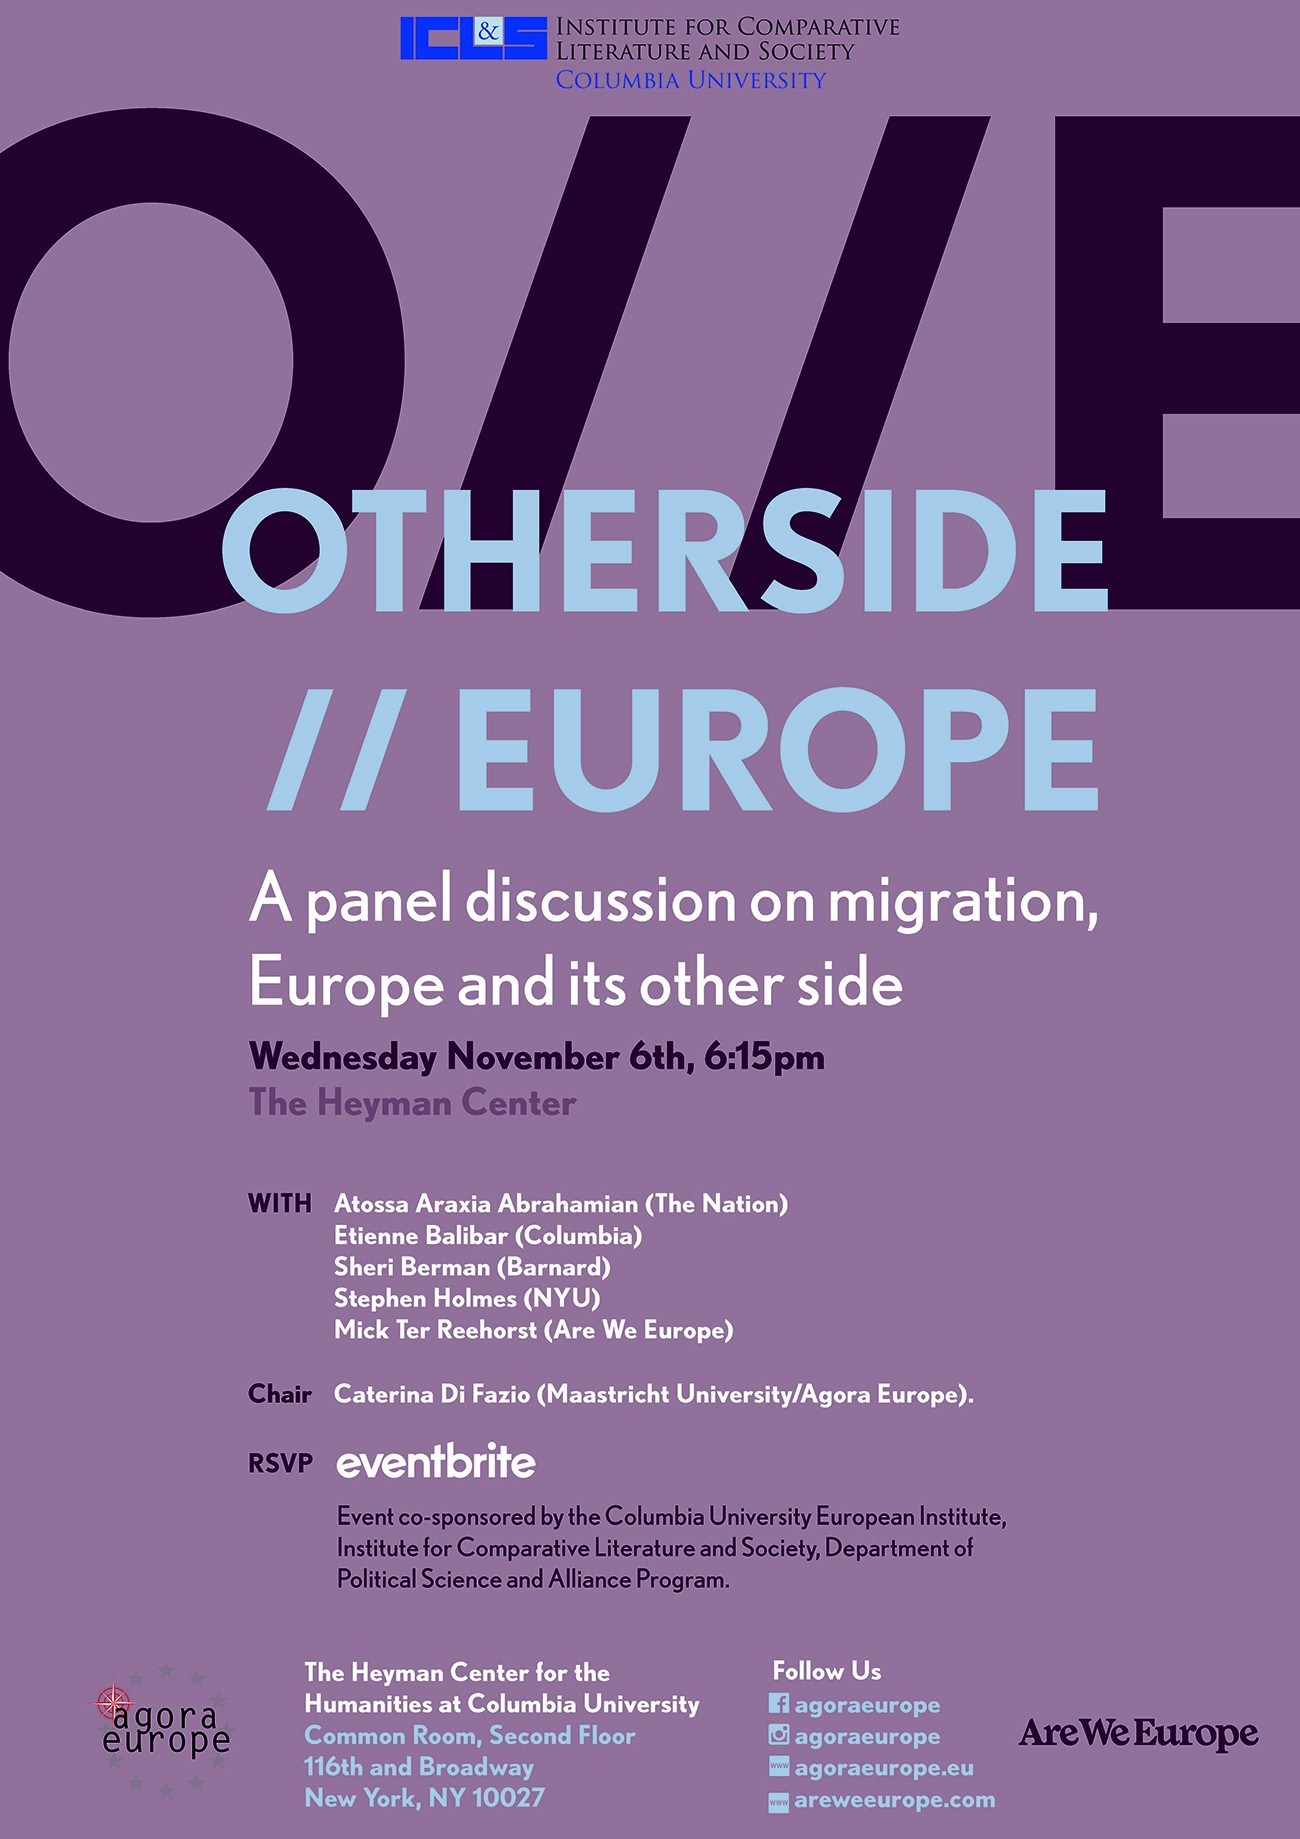 Otherside // Europe Poster